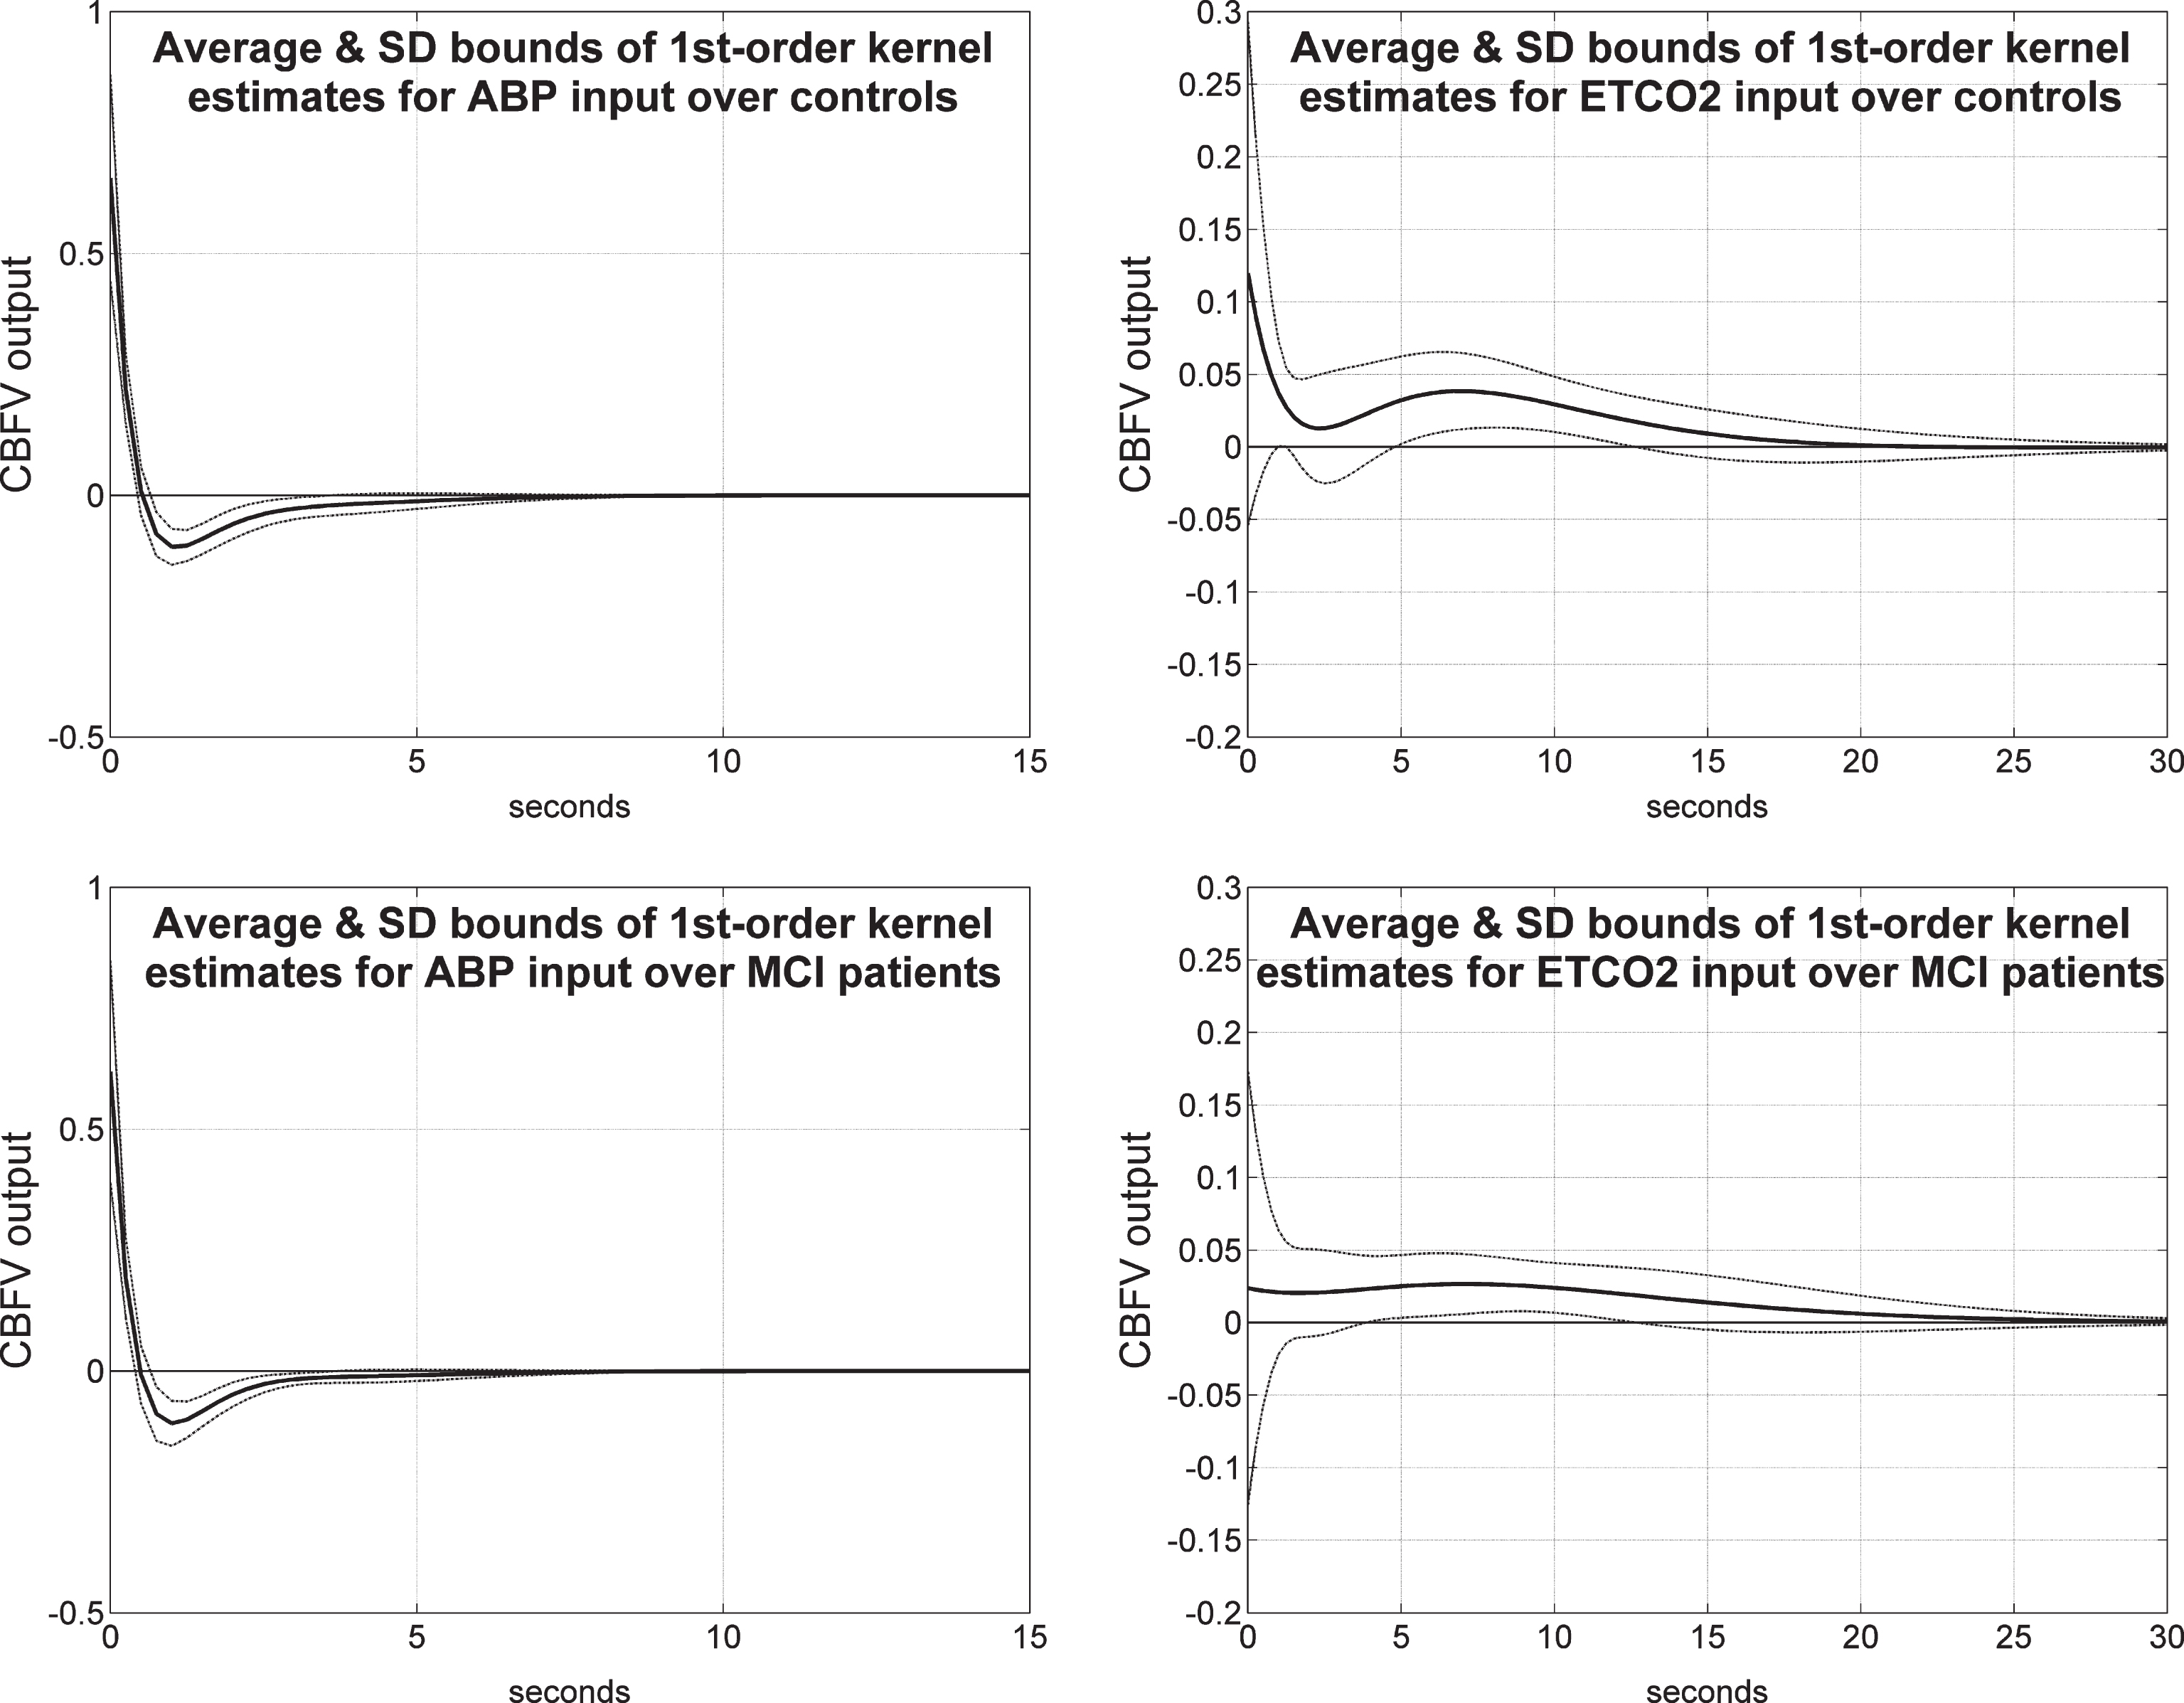 Average 1st order kernel estimates (± 1 SD bounds marked with dotted lines) over all controls (top panels) and MCI patients (bottom panels) for the ABP input (left panels) and ETCO2 input (right panels) when the output is CBFV/TCD.